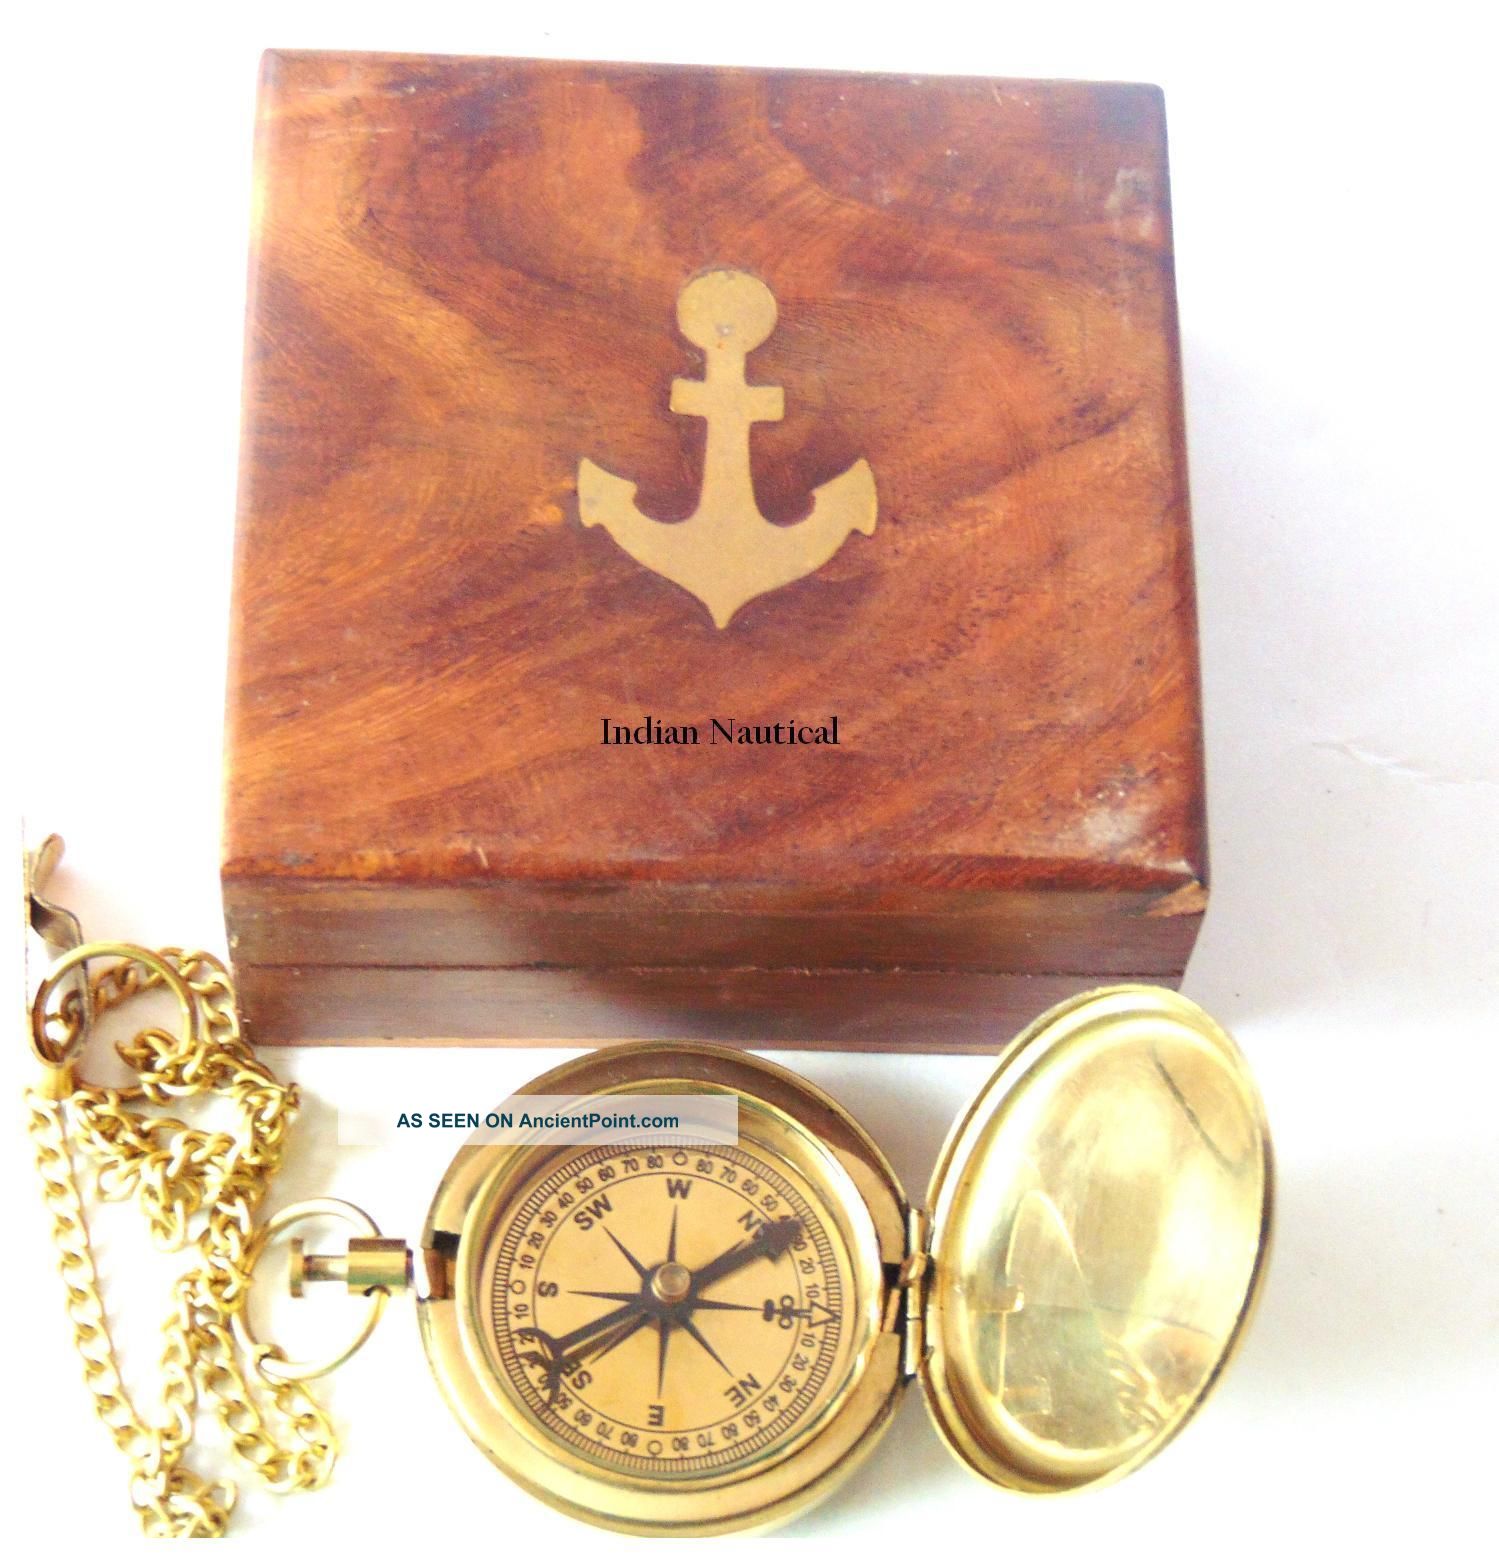 Antique Nautical Brass Compass - Vintage Push Button Compass With Wooden Box Compasses photo